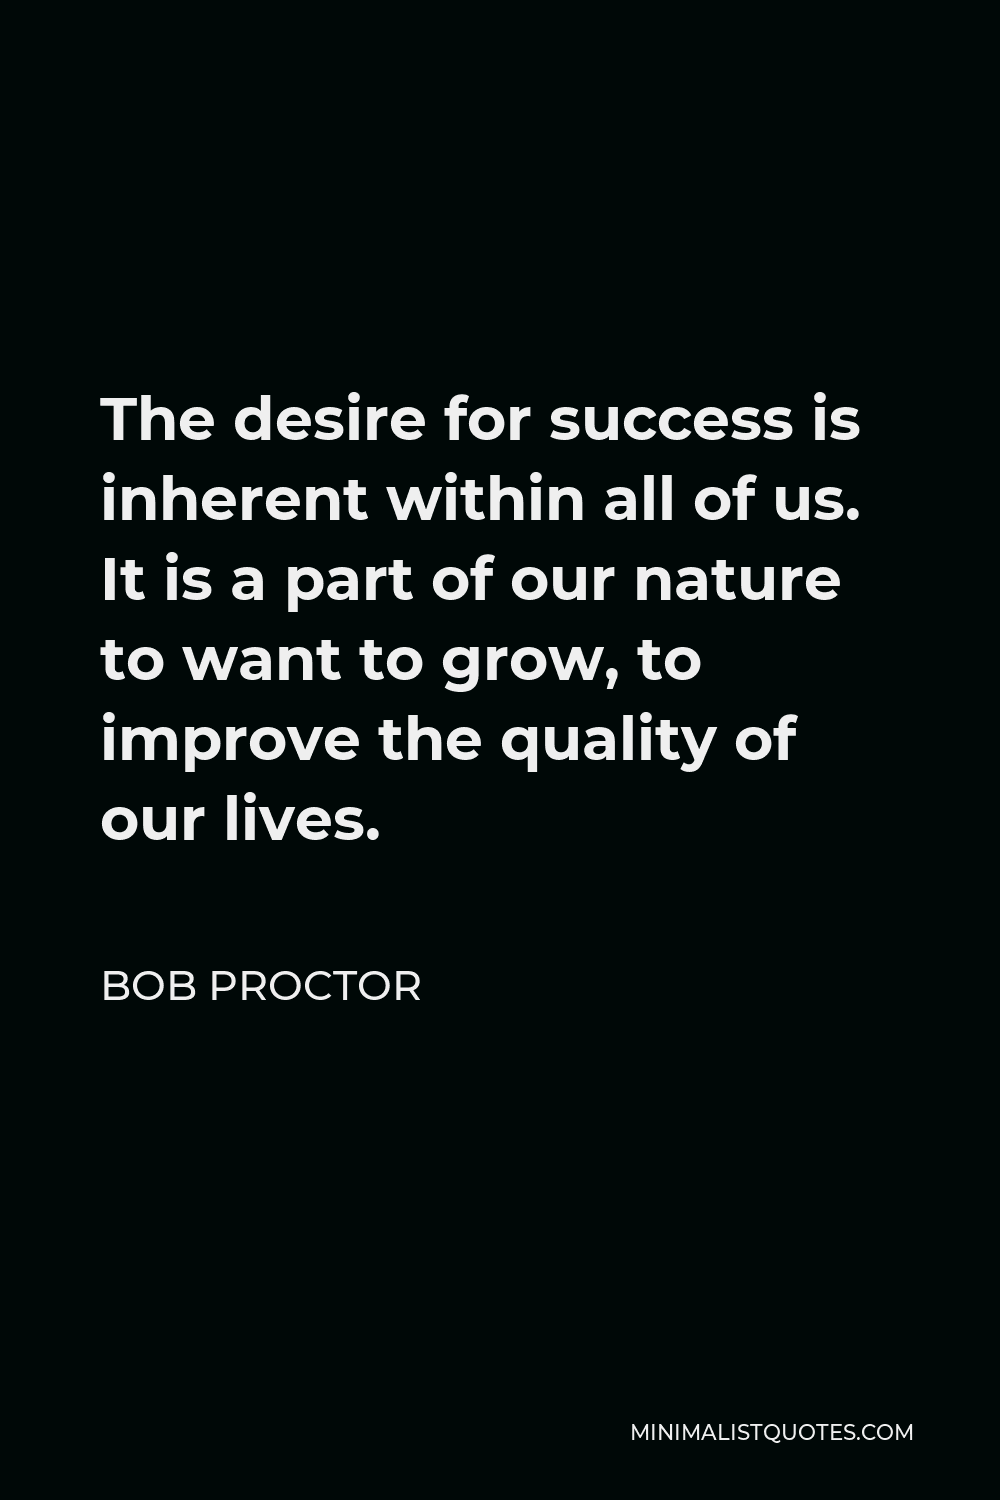 Bob Proctor Quote - The desire for success is inherent within all of us. It is a part of our nature to want to grow, to improve the quality of our lives.